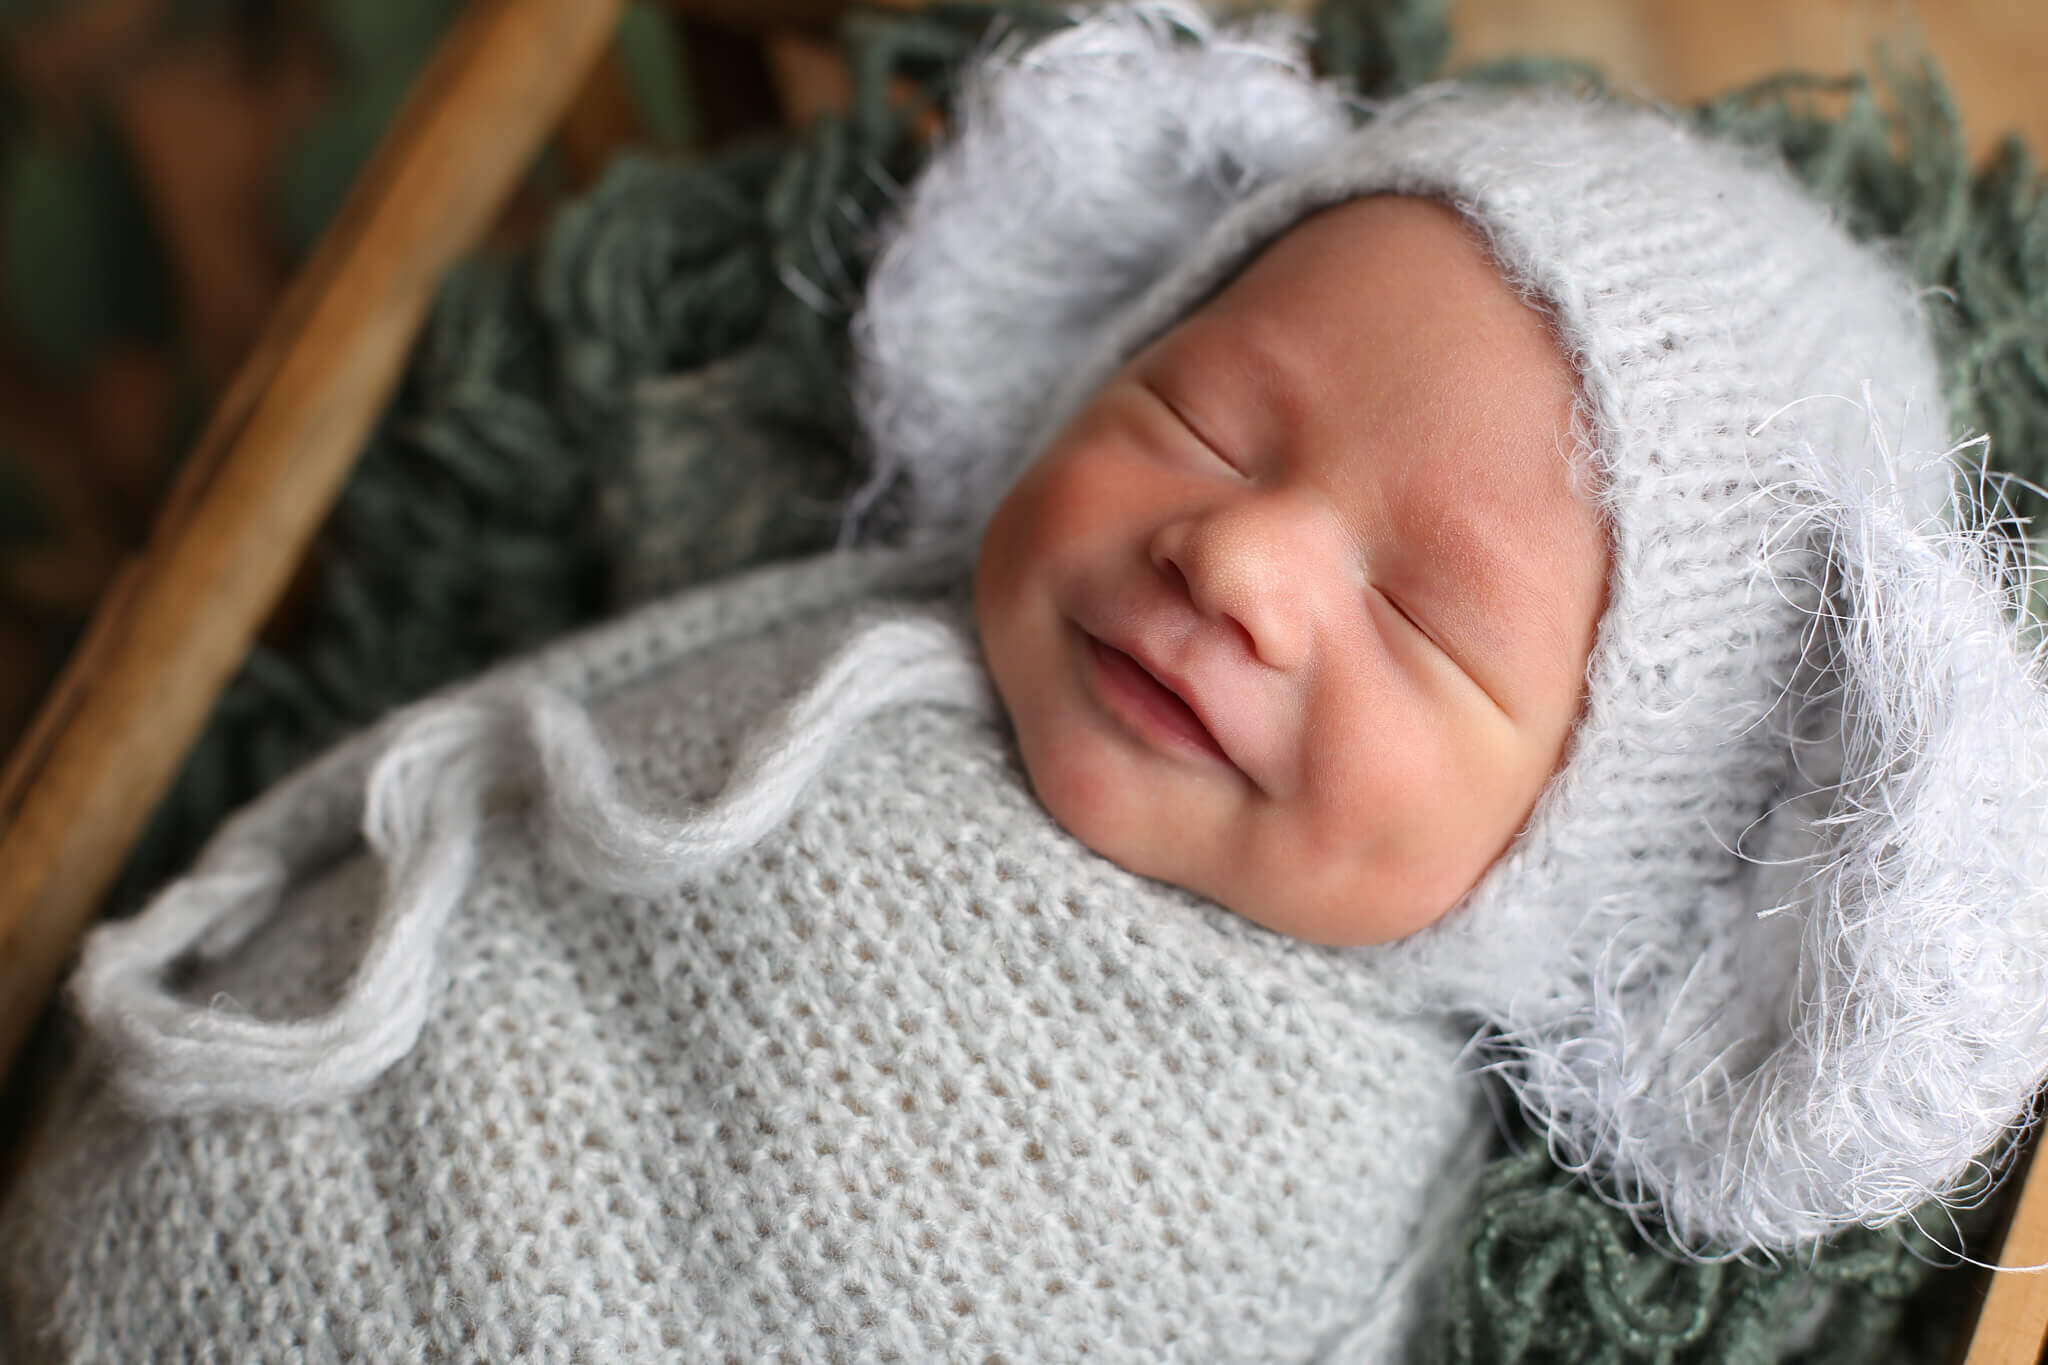  A picture of a new baby asleep in a knitted cap with big fuzzy ears, swaddled in a blanket with a little smile on its face from a baby photo session 